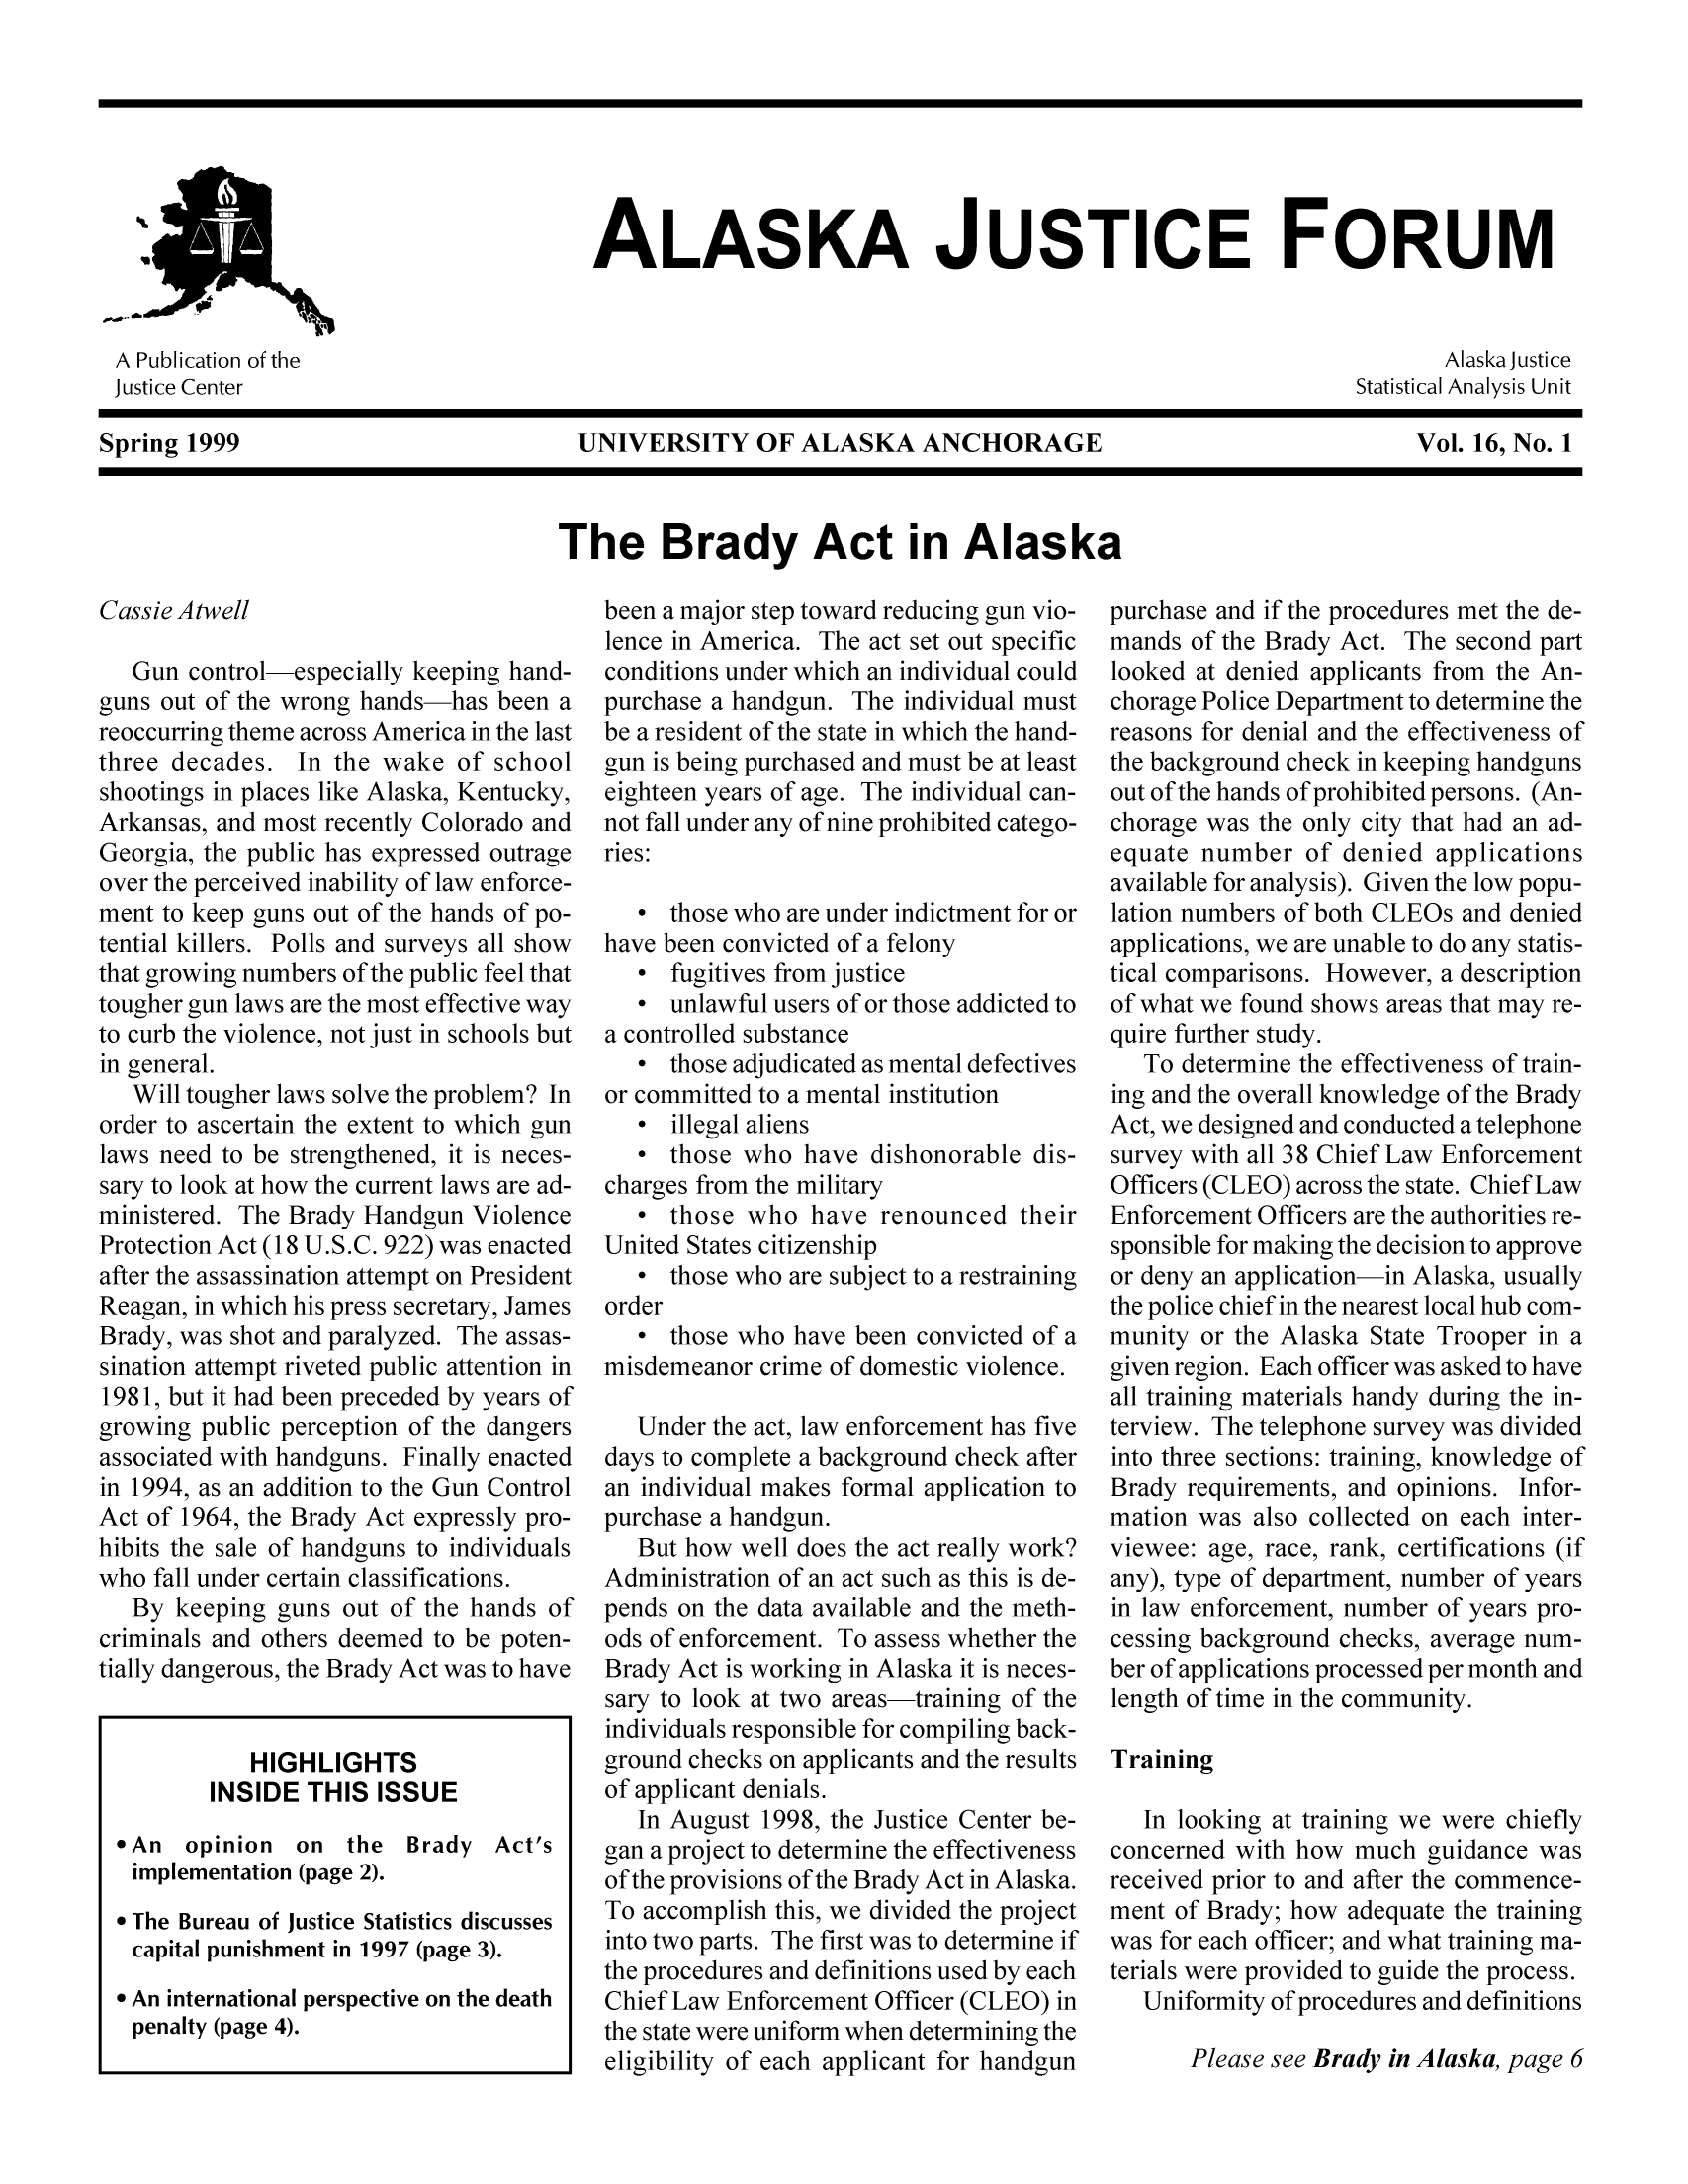 handle is hein.journals/aljufor16 and id is 1 raw text is: ALASKA JUSTICE FORUMA Publication of the                                                     Alaska JusticeJustice Center                                                      Statistical Analysis UnitSpring 1999               UNIVERSITY OF ALASKA ANCHORAGE                Vol. 16, No. 1The Brady Act in AlaskaCassie AtwellGun control-especially keeping hand-guns out of the wrong hands-has been areoccurring theme across America in the lastthree decades. In the wake of schoolshootings in places like Alaska, Kentucky,Arkansas, and most recently Colorado andGeorgia, the public has expressed outrageover the perceived inability of law enforce-ment to keep guns out of the hands of po-tential killers. Polls and surveys all showthat growing numbers of the public feel thattougher gun laws are the most effective wayto curb the violence, not just in schools butin general.Will tougher laws solve the problem? Inorder to ascertain the extent to which gunlaws need to be strengthened, it is neces-sary to look at how the current laws are ad-ministered. The Brady Handgun ViolenceProtection Act (18 U.S.C. 922) was enactedafter the assassination attempt on PresidentReagan, in which his press secretary, JamesBrady, was shot and paralyzed. The assas-sination attempt riveted public attention in1981, but it had been preceded by years ofgrowing public perception of the dangersassociated with handguns. Finally enactedin 1994, as an addition to the Gun ControlAct of 1964, the Brady Act expressly pro-hibits the sale of handguns to individualswho fall under certain classifications.By keeping guns out of the hands ofcriminals and others deemed to be poten-tially dangerous, the Brady Act was to haveHIGHLIGHTSINSIDE THIS ISSUE*An opinion on the Brady Act'simplementation (page 2). The Bureau of Justice Statistics discussescapital punishment in 1997 (page 3). An international perspective on the deathpenalty (page 4).been a major step toward reducing gun vio-lence in America. The act set out specificconditions under which an individual couldpurchase a handgun. The individual mustbe a resident of the state in which the hand-gun is being purchased and must be at leasteighteen years of age. The individual can-not fall under any of nine prohibited catego-ries:0 those who are under indictment for orhave been convicted of a felony fugitives from justice unlawful users of or those addicted toa controlled substance0 those adjudicated as mental defectivesor committed to a mental institution illegal aliens those who have dishonorable dis-charges from the military0 those who have renounced theirUnited States citizenship0 those who are subject to a restrainingorder0 those who have been convicted of amisdemeanor crime of domestic violence.Under the act, law enforcement has fivedays to complete a background check afteran individual makes formal application topurchase a handgun.But how well does the act really work?Administration of an act such as this is de-pends on the data available and the meth-ods of enforcement. To assess whether theBrady Act is working in Alaska it is neces-sary to look at two areas-training of theindividuals responsible for compiling back-ground checks on applicants and the resultsof applicant denials.In August 1998, the Justice Center be-gan a project to determine the effectivenessof the provisions of the Brady Act in Alaska.To accomplish this, we divided the projectinto two parts. The first was to determine ifthe procedures and definitions used by eachChief Law Enforcement Officer (CLEO) inthe state were uniform when determining theeligibility of each applicant for handgunpurchase and if the procedures met the de-mands of the Brady Act. The second partlooked at denied applicants from the An-chorage Police Department to determine thereasons for denial and the effectiveness ofthe background check in keeping handgunsout of the hands of prohibited persons. (An-chorage was the only city that had an ad-equate number of denied applicationsavailable for analysis). Given the low popu-lation numbers of both CLEOs and deniedapplications, we are unable to do any statis-tical comparisons. However, a descriptionof what we found shows areas that may re-quire further study.To determine the effectiveness of train-ing and the overall knowledge of the BradyAct, we designed and conducted a telephonesurvey with all 38 Chief Law EnforcementOfficers (CLEO) across the state. Chief LawEnforcement Officers are the authorities re-sponsible for making the decision to approveor deny an application-in Alaska, usuallythe police chief in the nearest local hub com-munity or the Alaska State Trooper in agiven region. Each officer was asked to haveall training materials handy during the in-terview. The telephone survey was dividedinto three sections: training, knowledge ofBrady requirements, and opinions. Infor-mation was also collected on each inter-viewee: age, race, rank, certifications (ifany), type of department, number of yearsin law enforcement, number of years pro-cessing background checks, average num-ber of applications processed per month andlength of time in the community.TrainingIn looking at training we were chieflyconcerned with how much guidance wasreceived prior to and after the commence-ment of Brady; how adequate the trainingwas for each officer; and what training ma-terials were provided to guide the process.Uniformity of procedures and definitionsPlease see Brady in Alaska, page 6